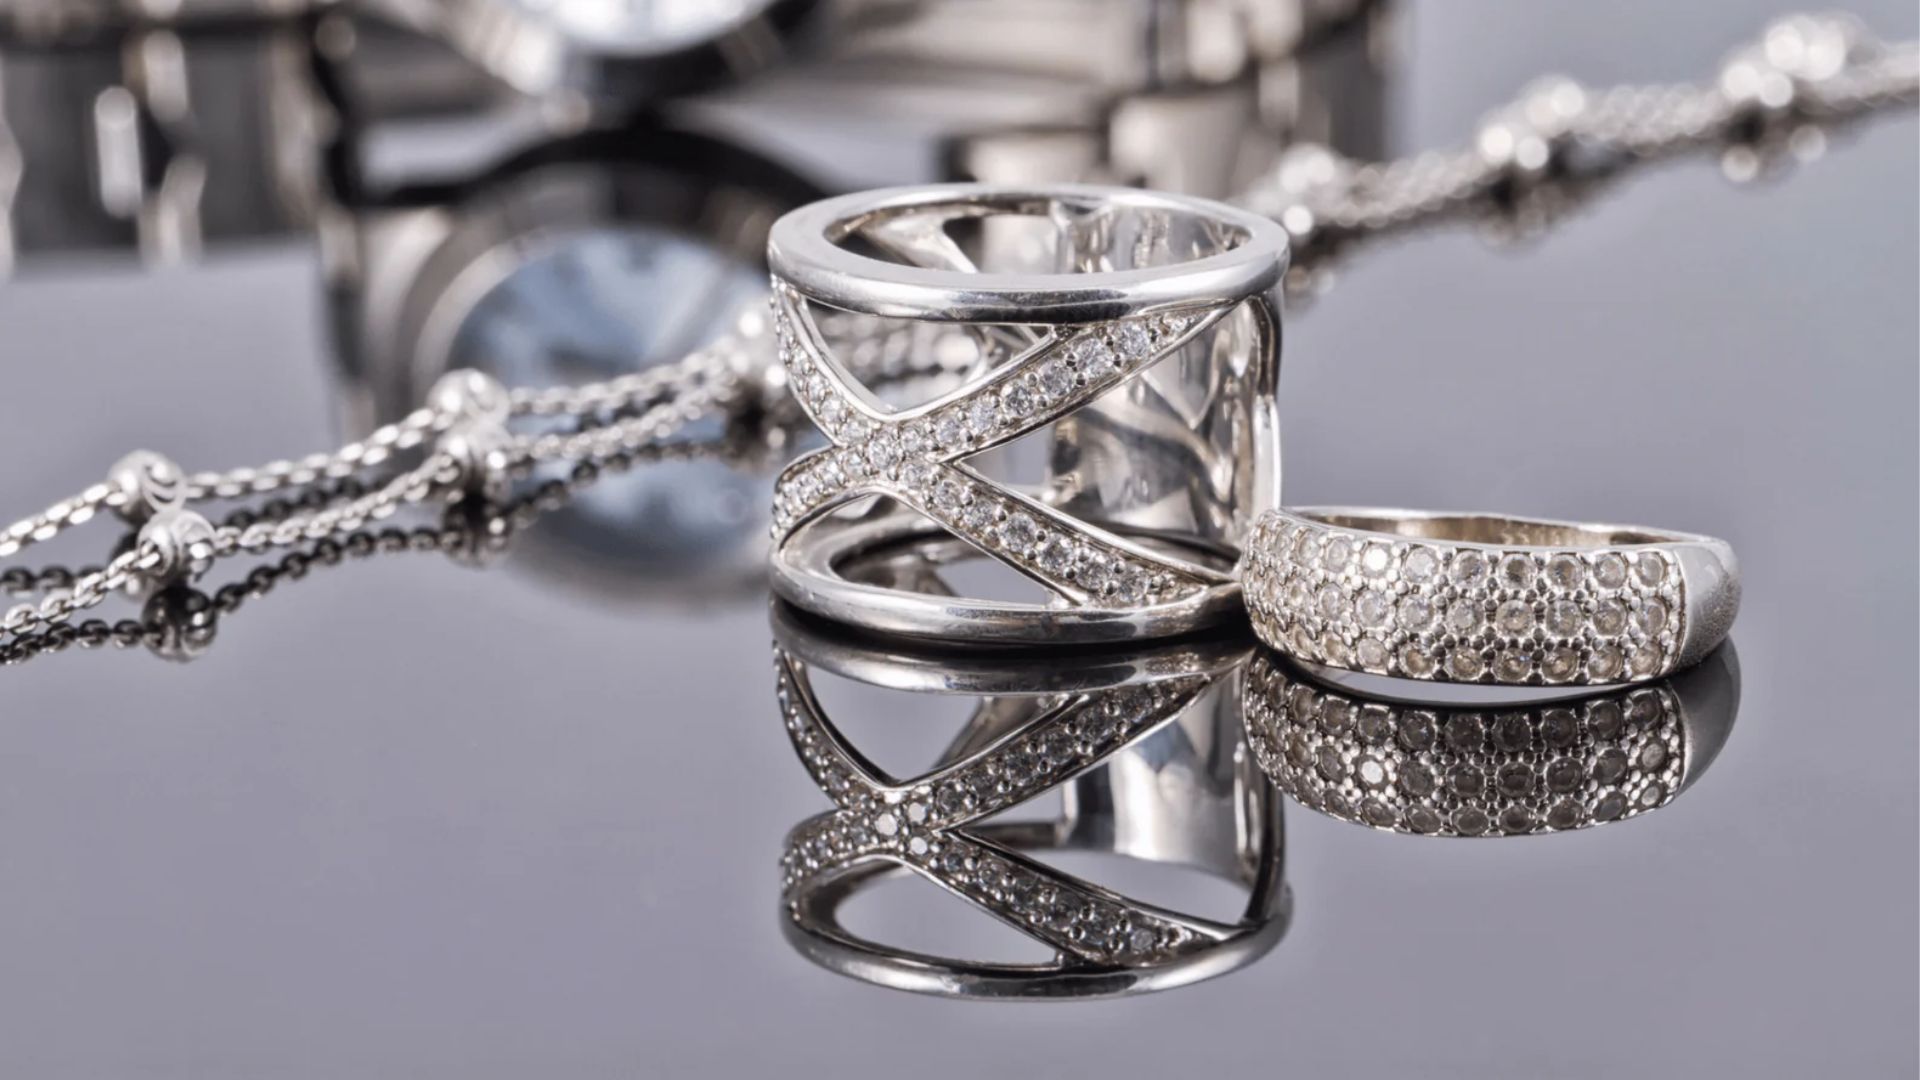 Timeless Silver Jewelry - A Testament To Elegance And Durability